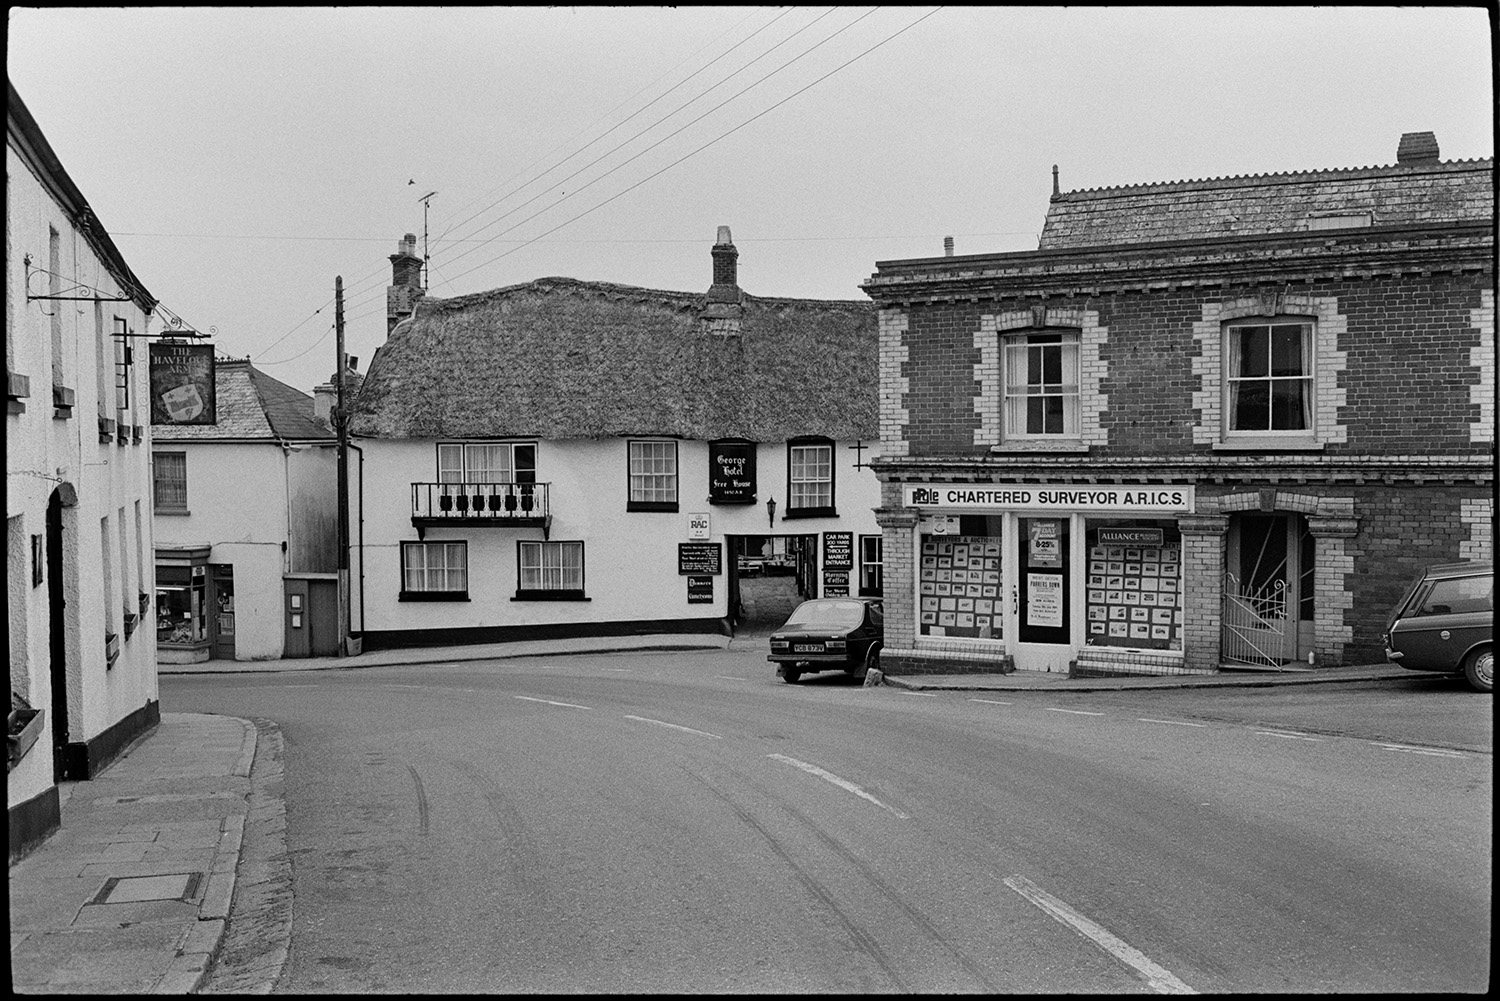 Street scene with pub.
[A view of Market Street, Hatherleigh with the Havelock Arms, The George Hotel and P. Pyle Chartered Surveyors.]